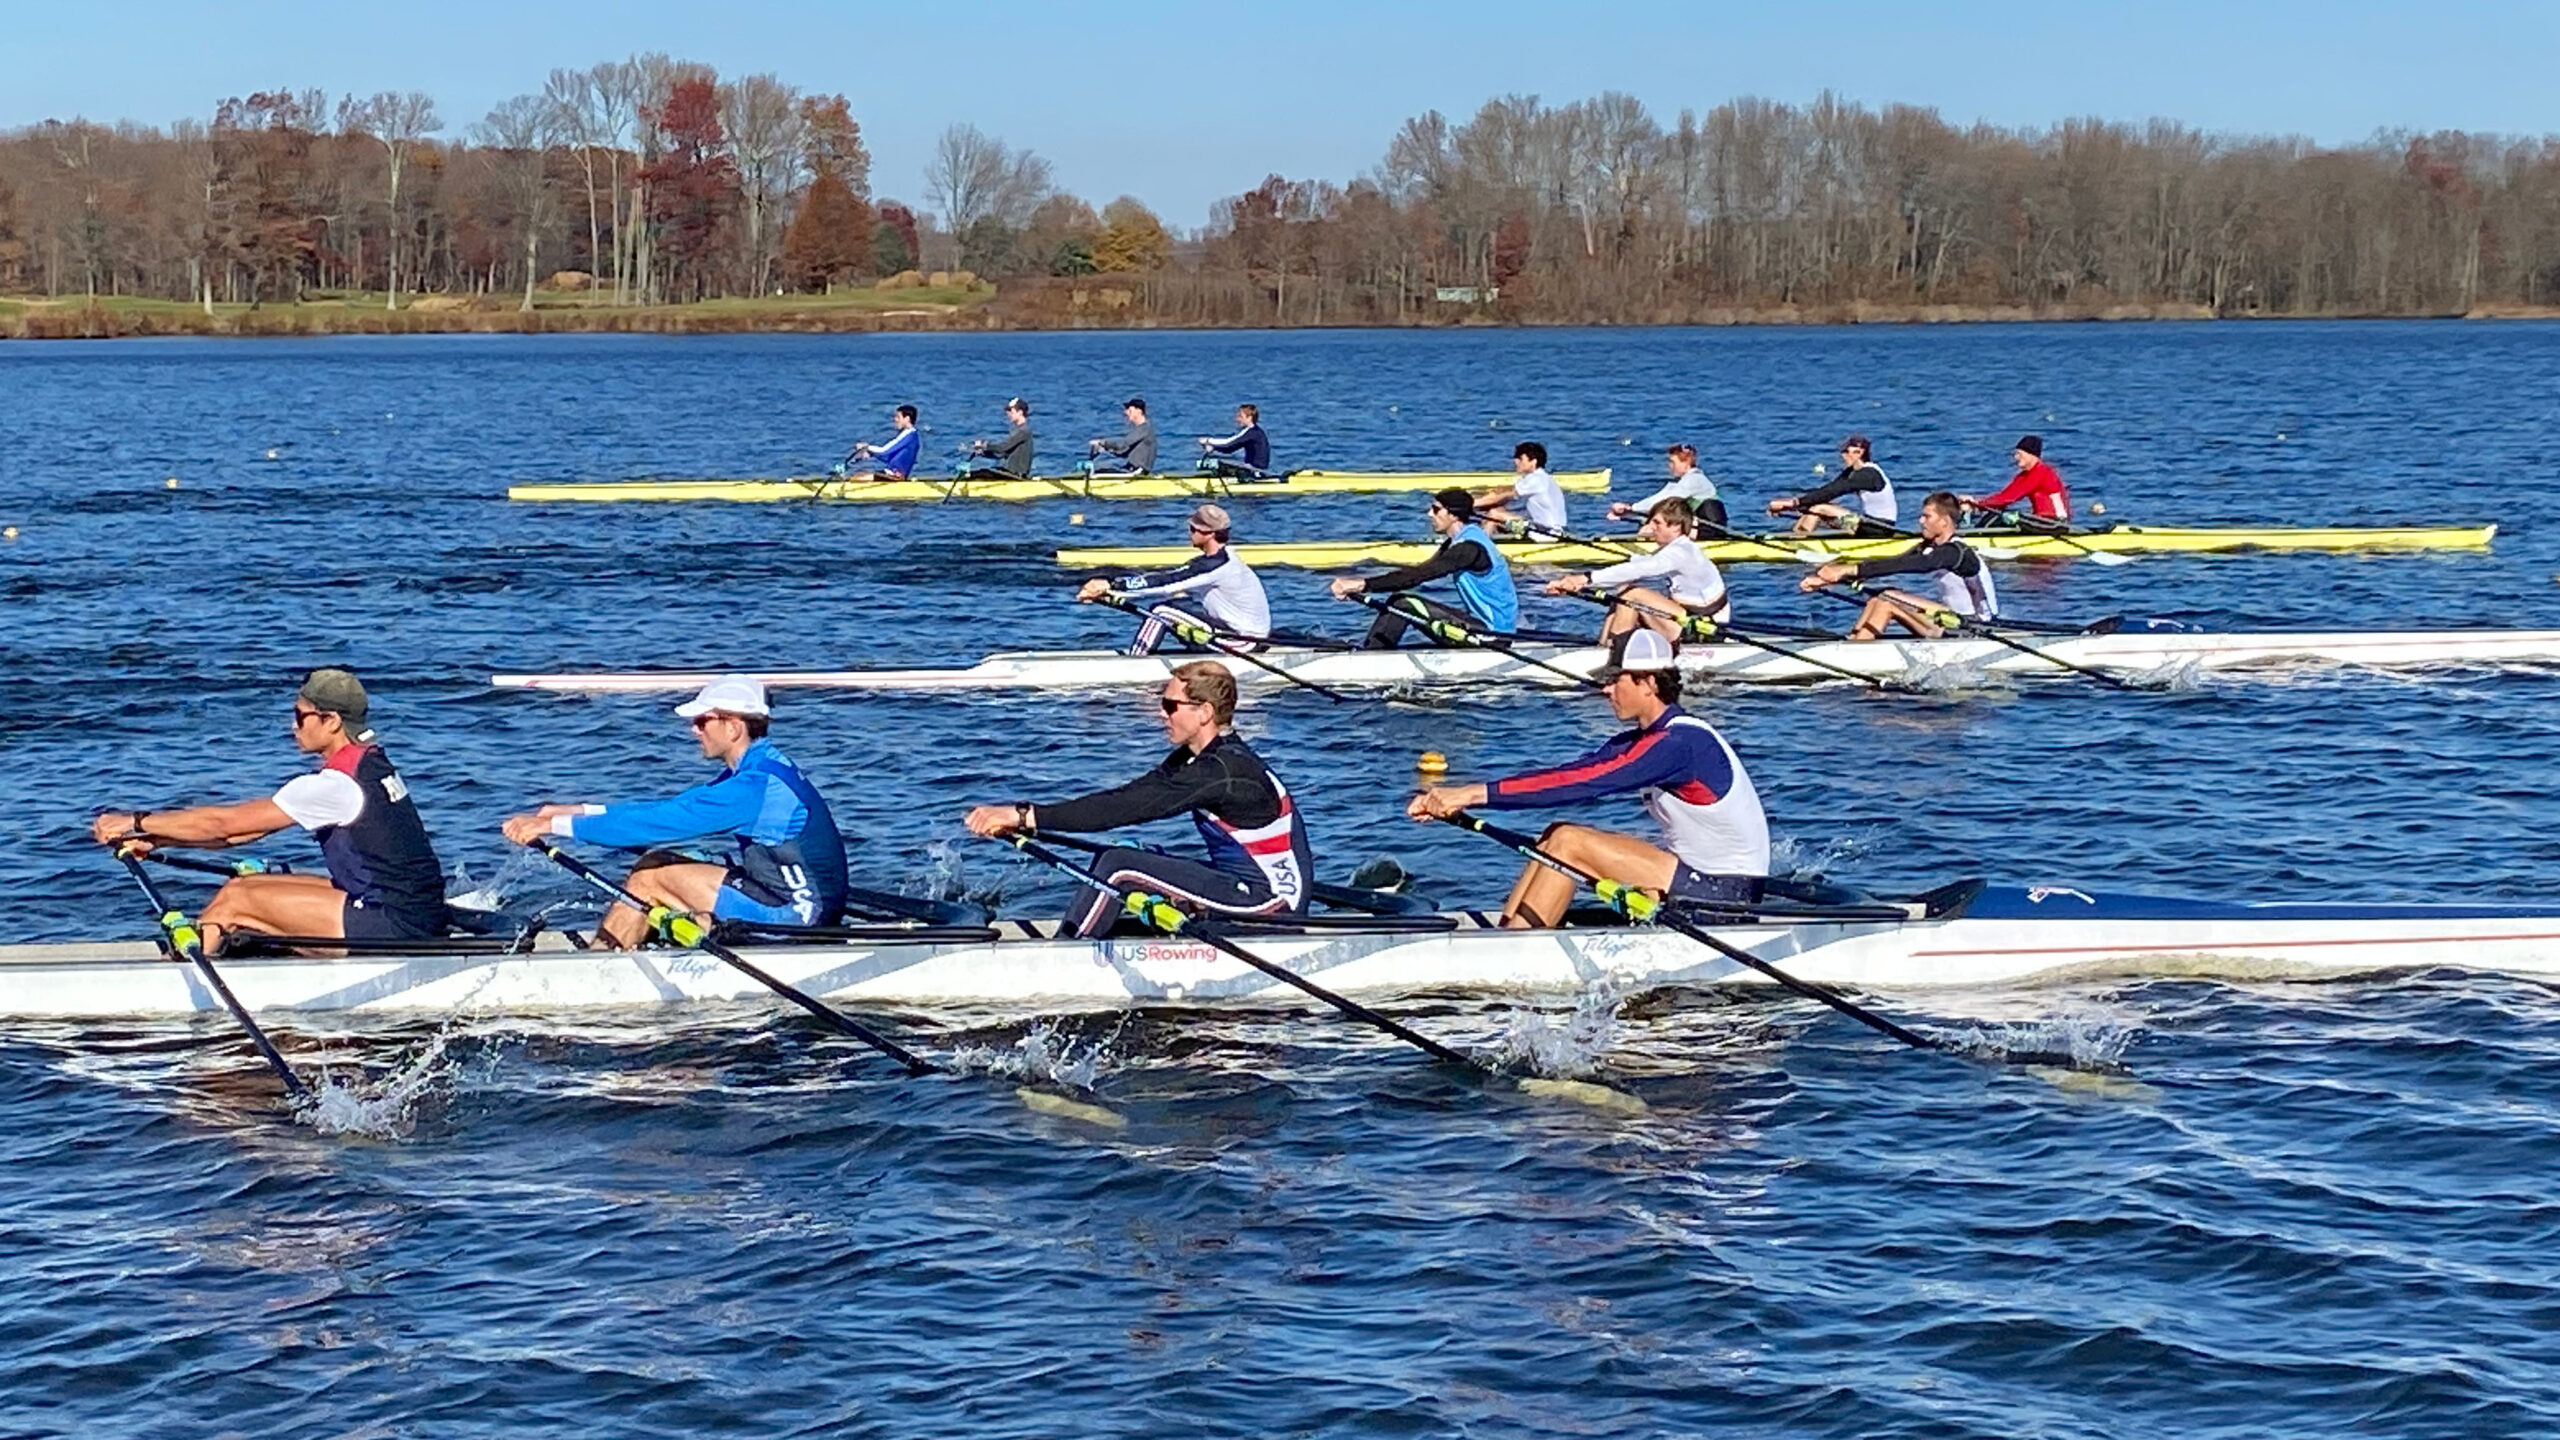 Penn AC athletes rowed in serveral quads following the singles racing.